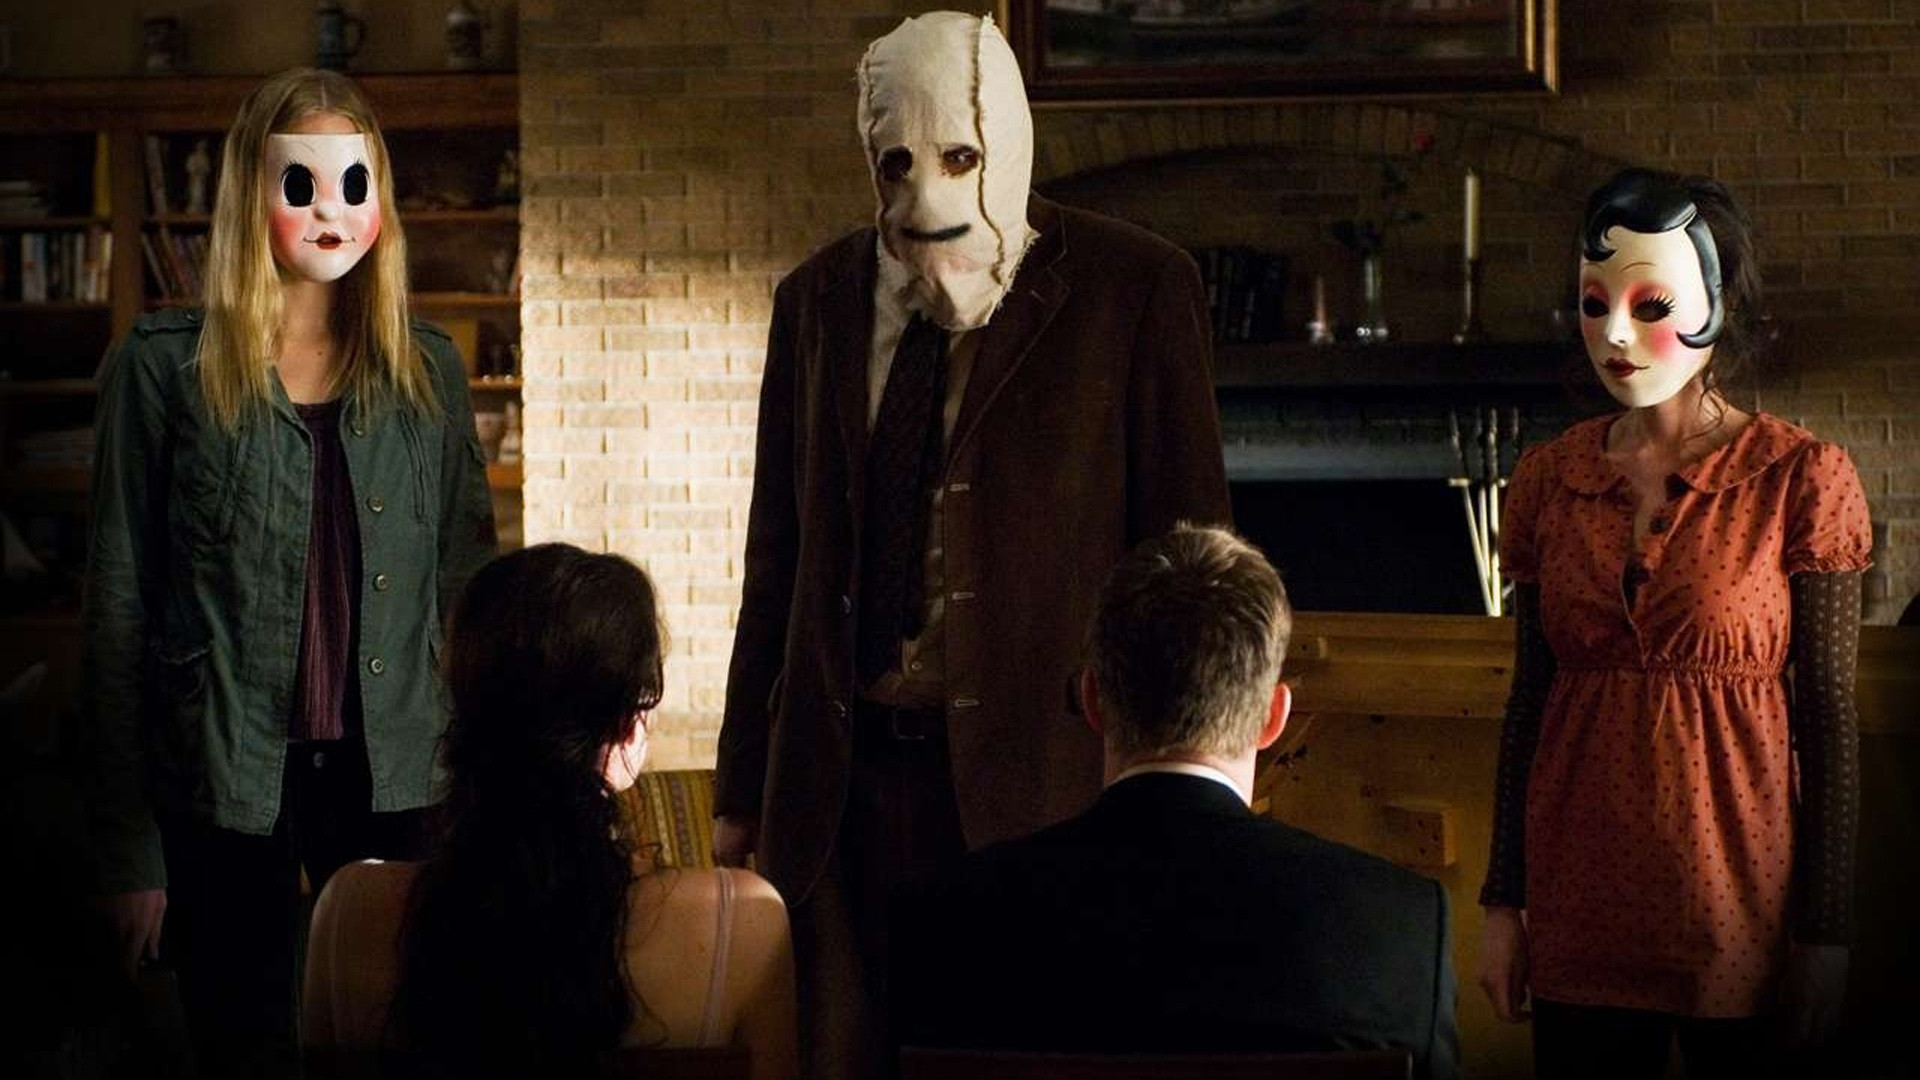 This is a still from The Strangers.